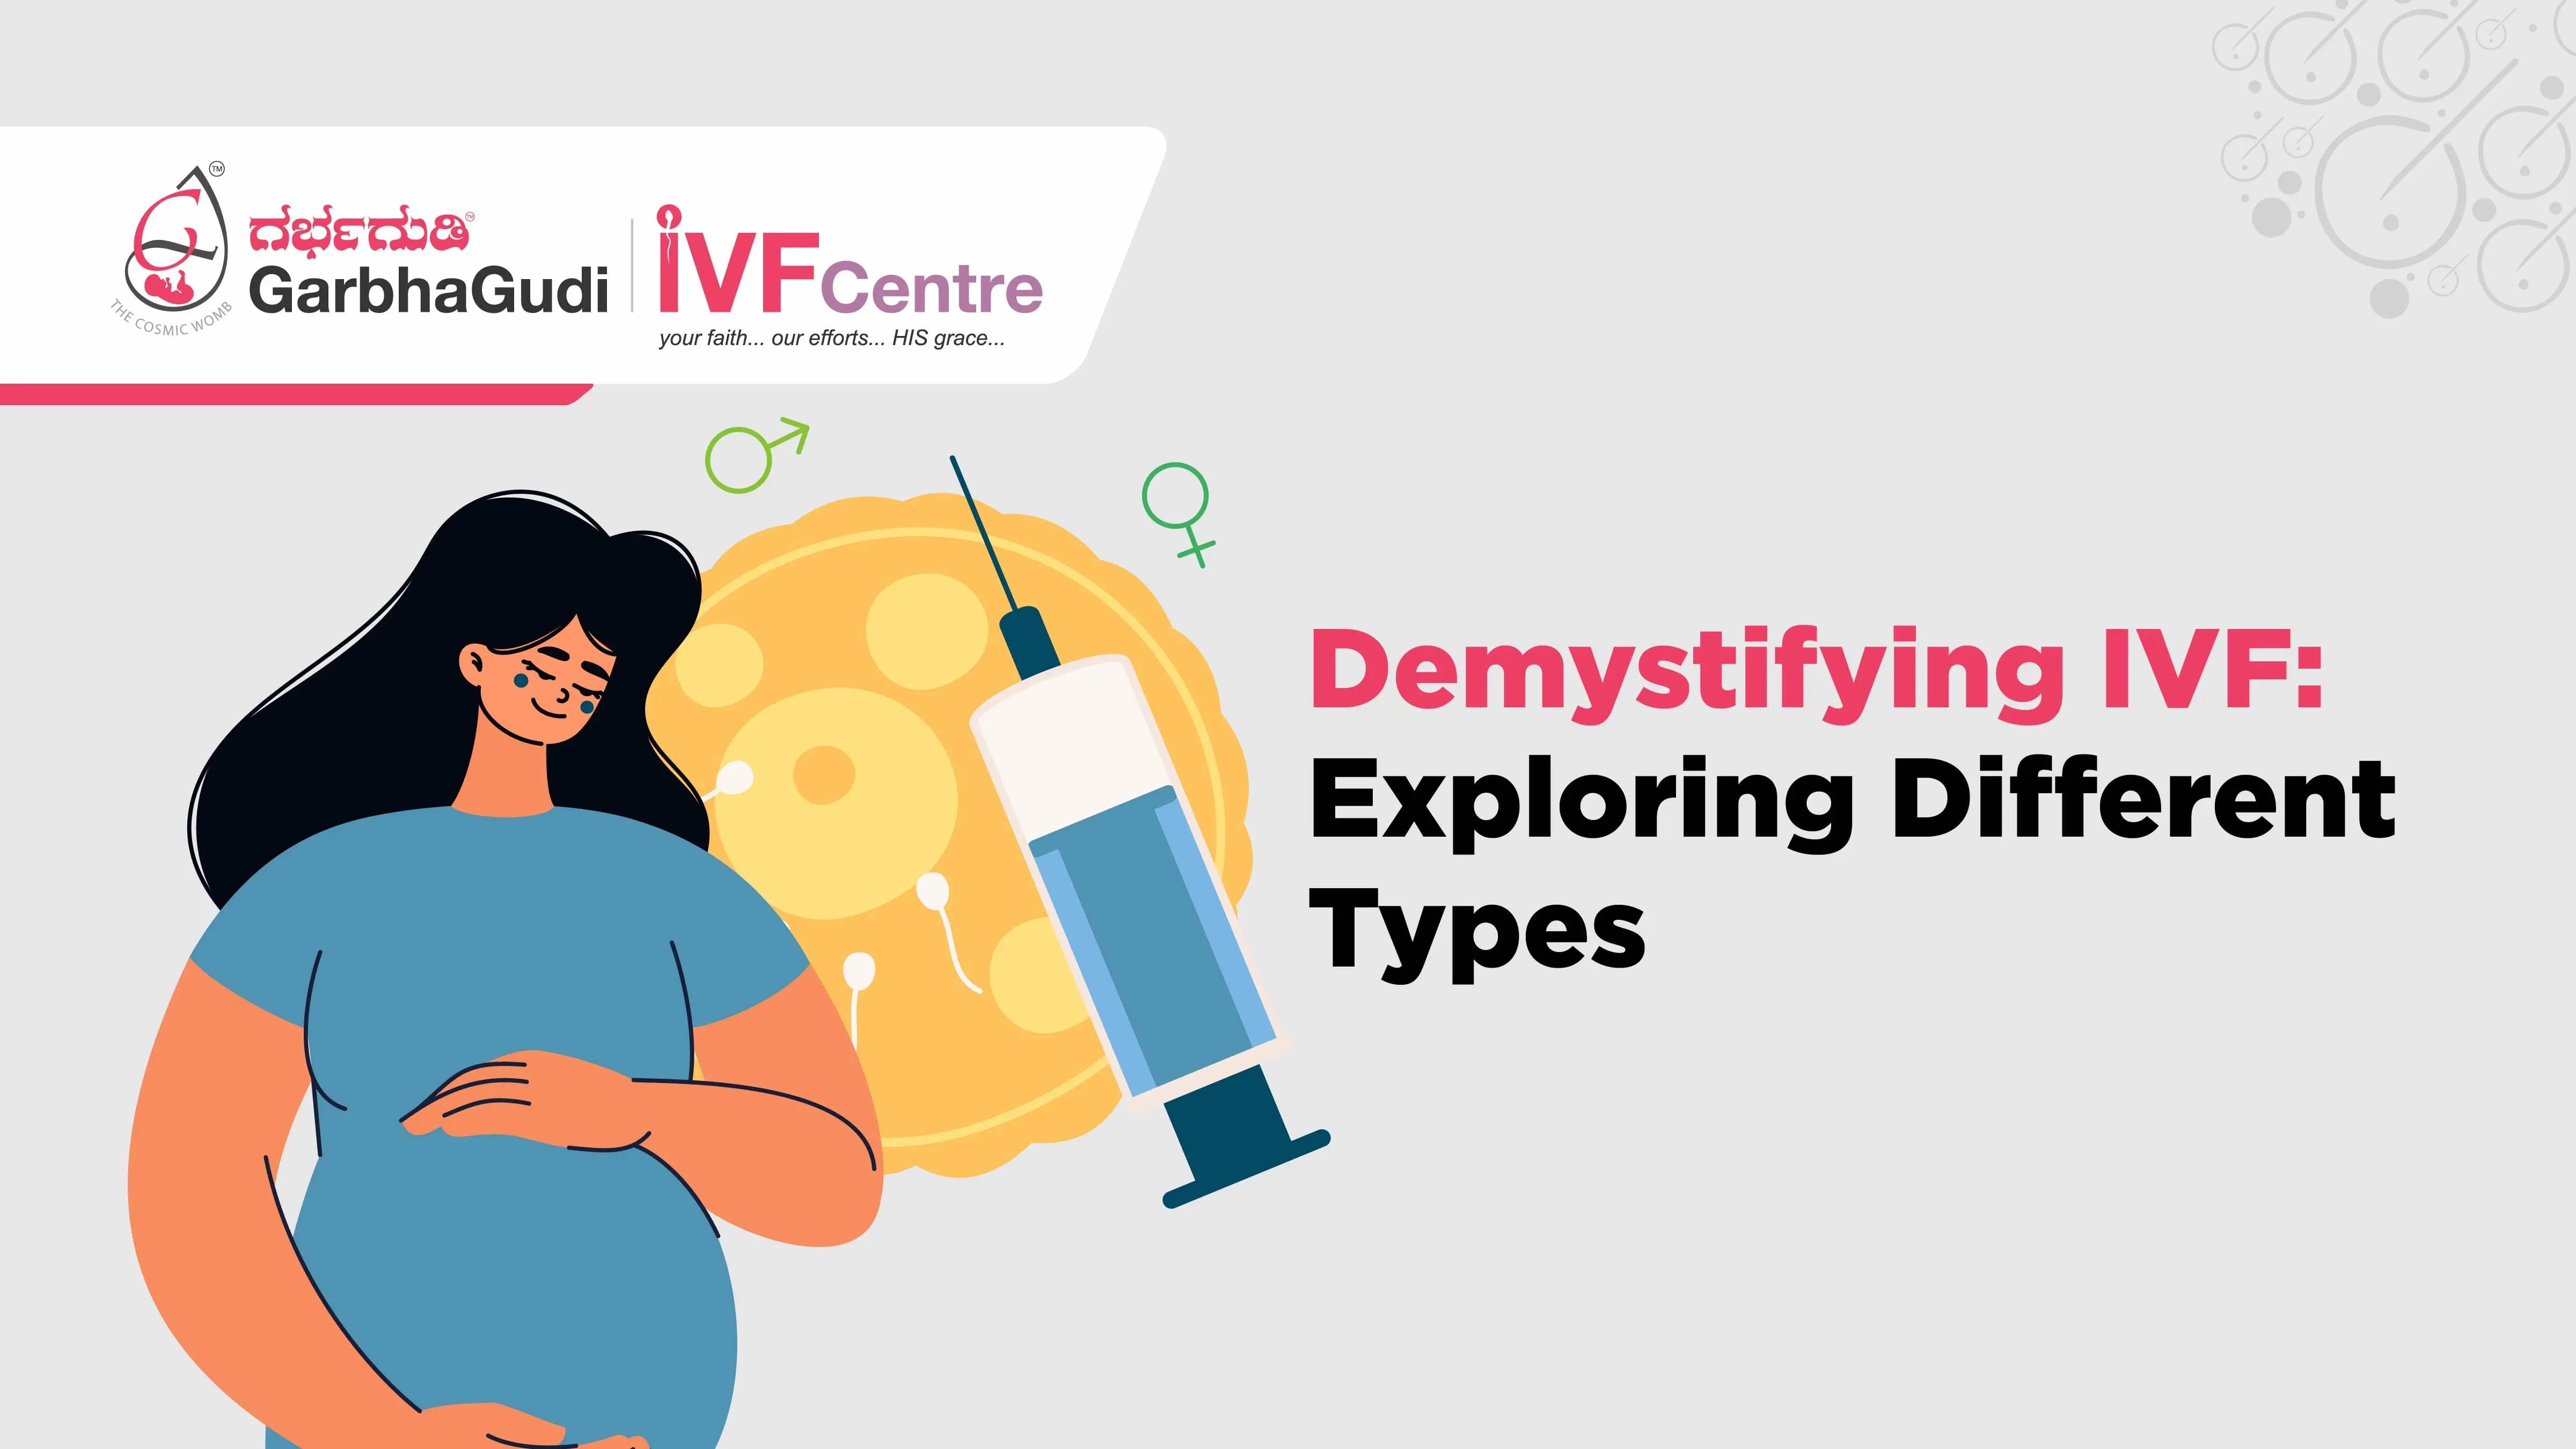 Demystifying IVF: Exploring Different Types